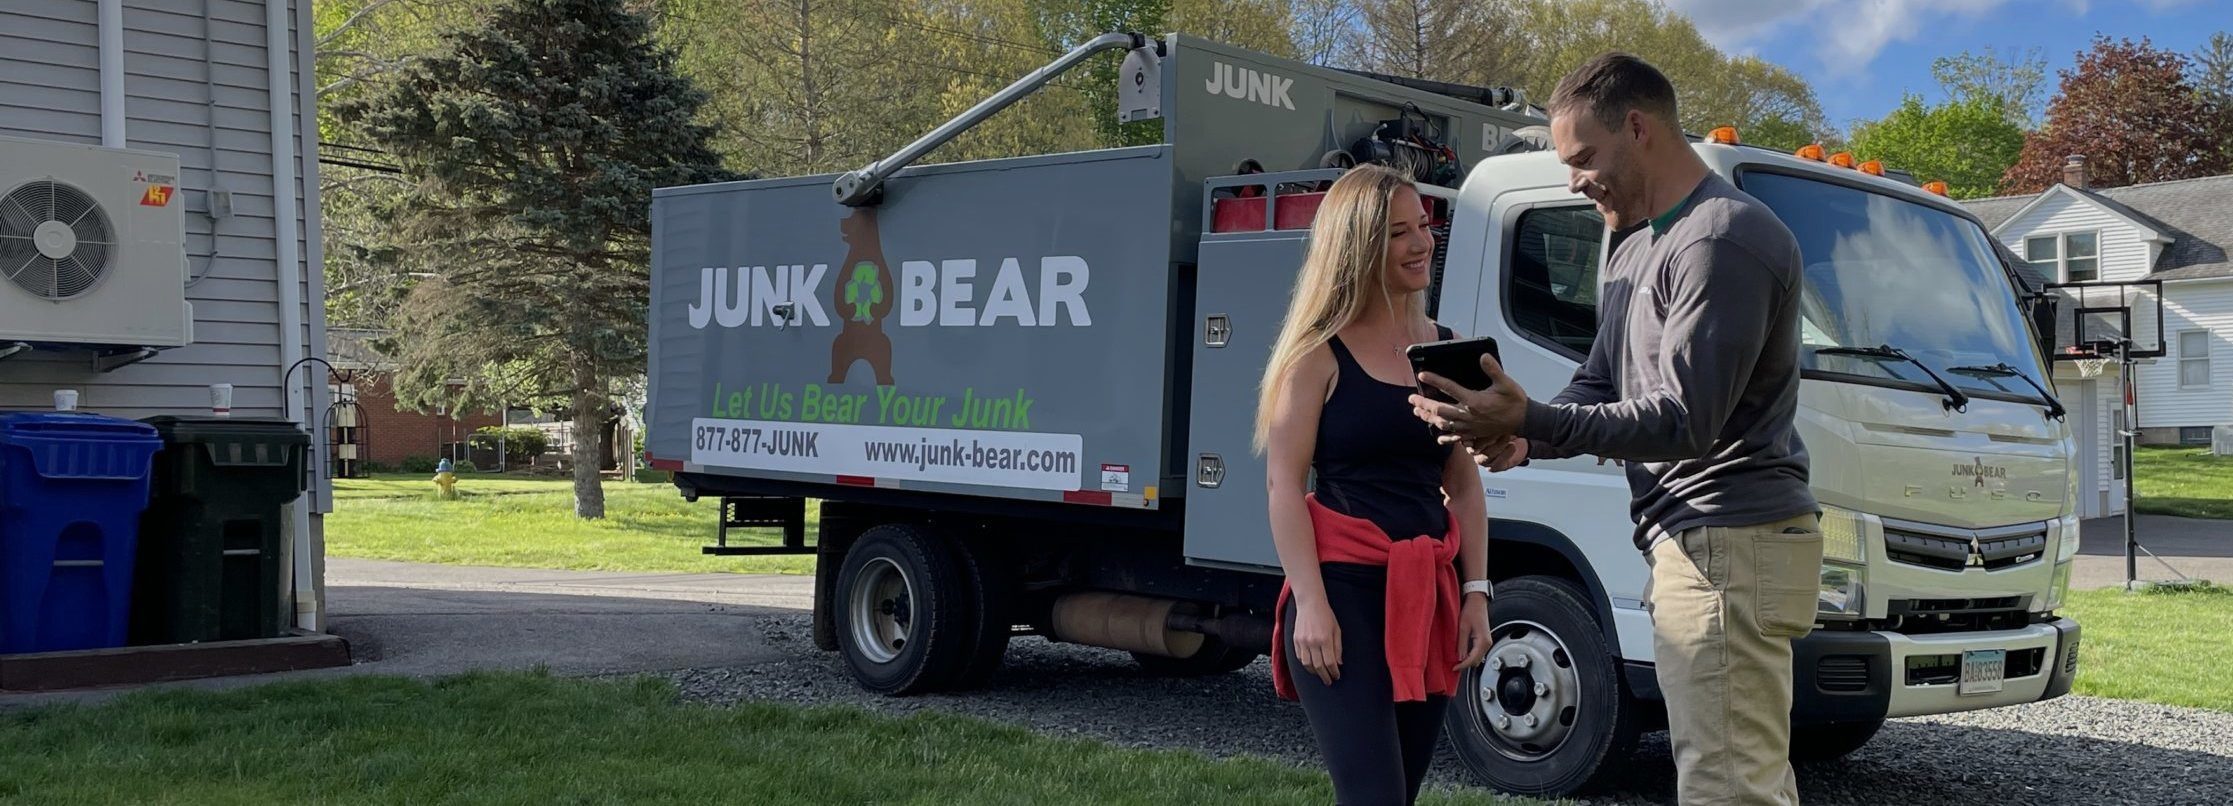 Professional for junk removal in Hartford, CT interacting with a customer